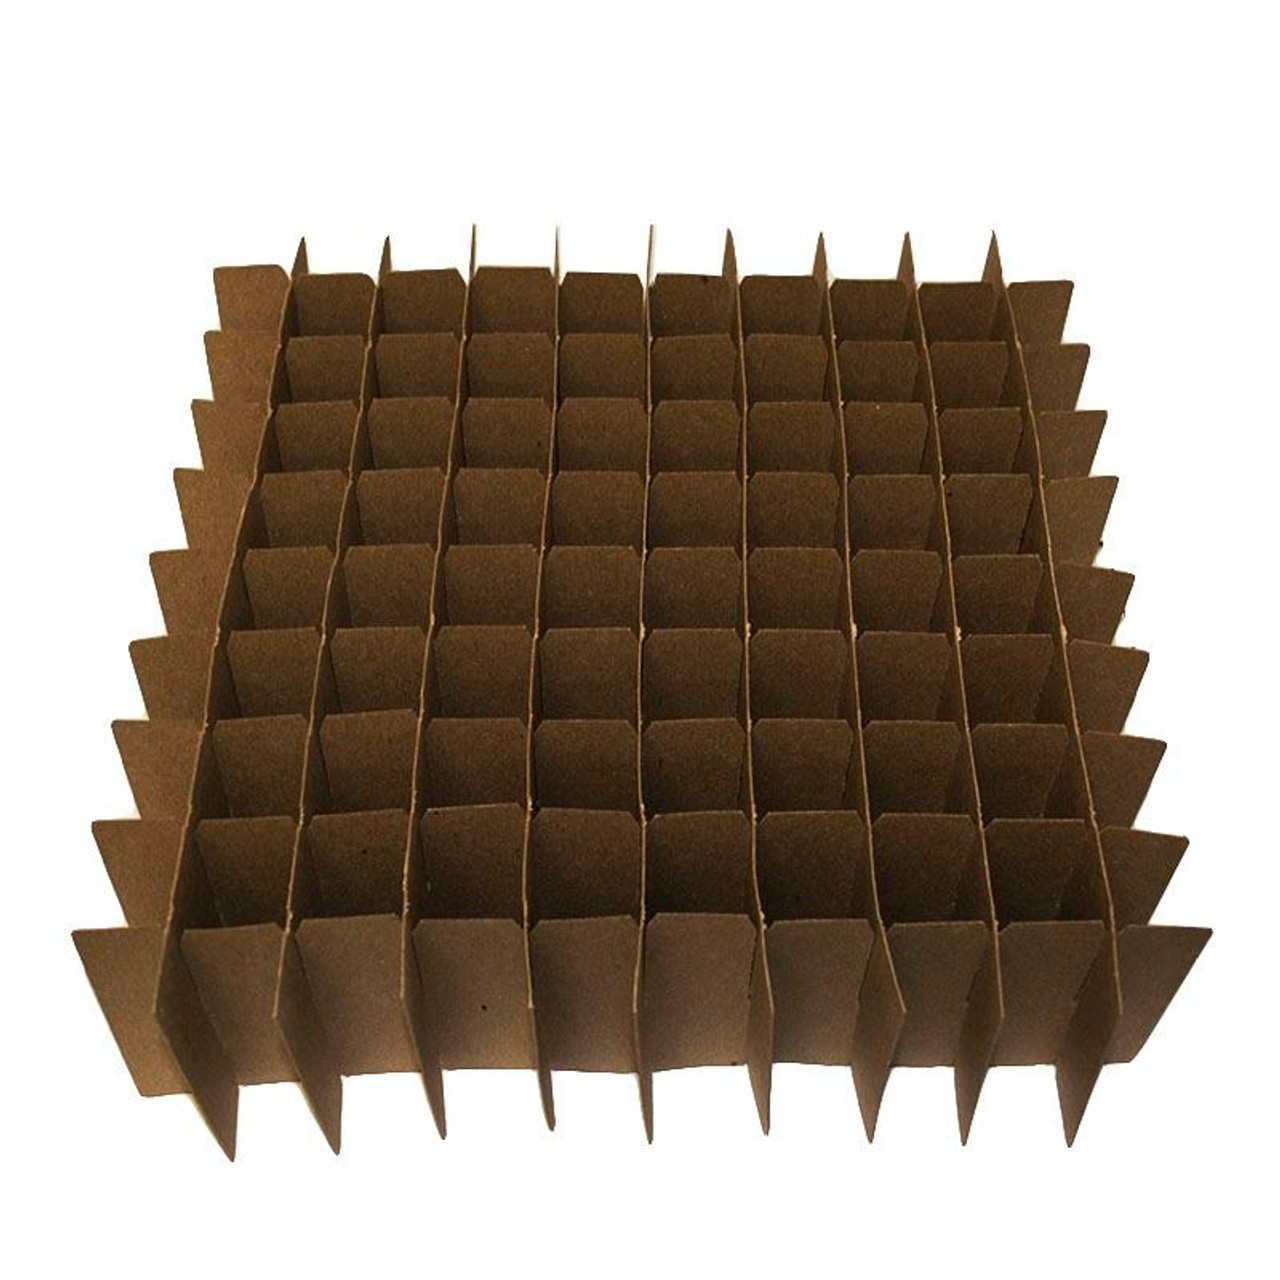 Chipboard Box Dividers 81 Cells for 1 oz (30ml) Boston Round (Pack of 10)  for E-Liquid Juice Vapor Cigarettes, Essential Oils, Cosmetics etc. Fits